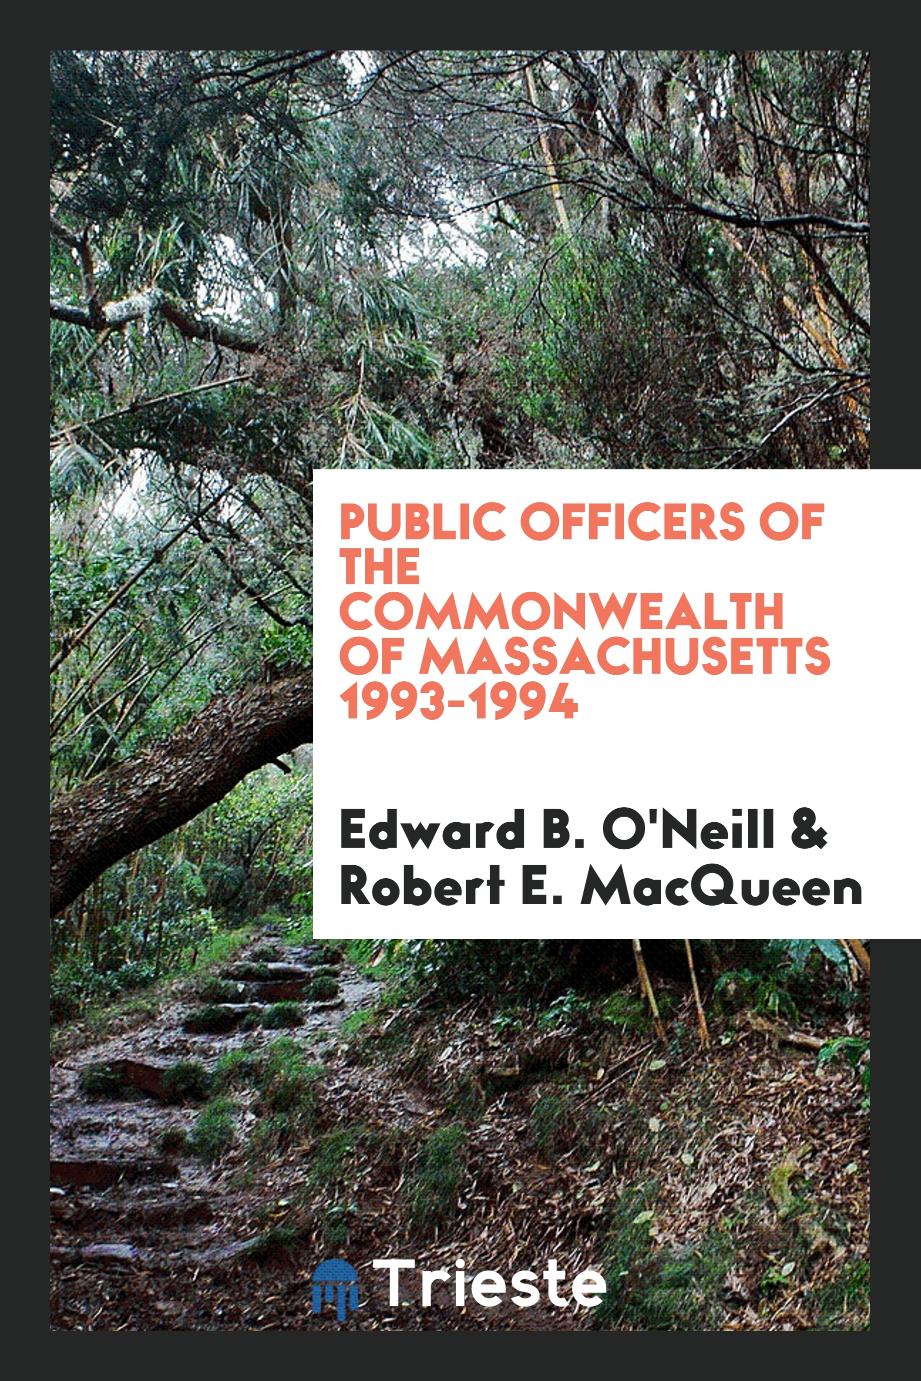 Public officers of the Commonwealth of Massachusetts 1993-1994